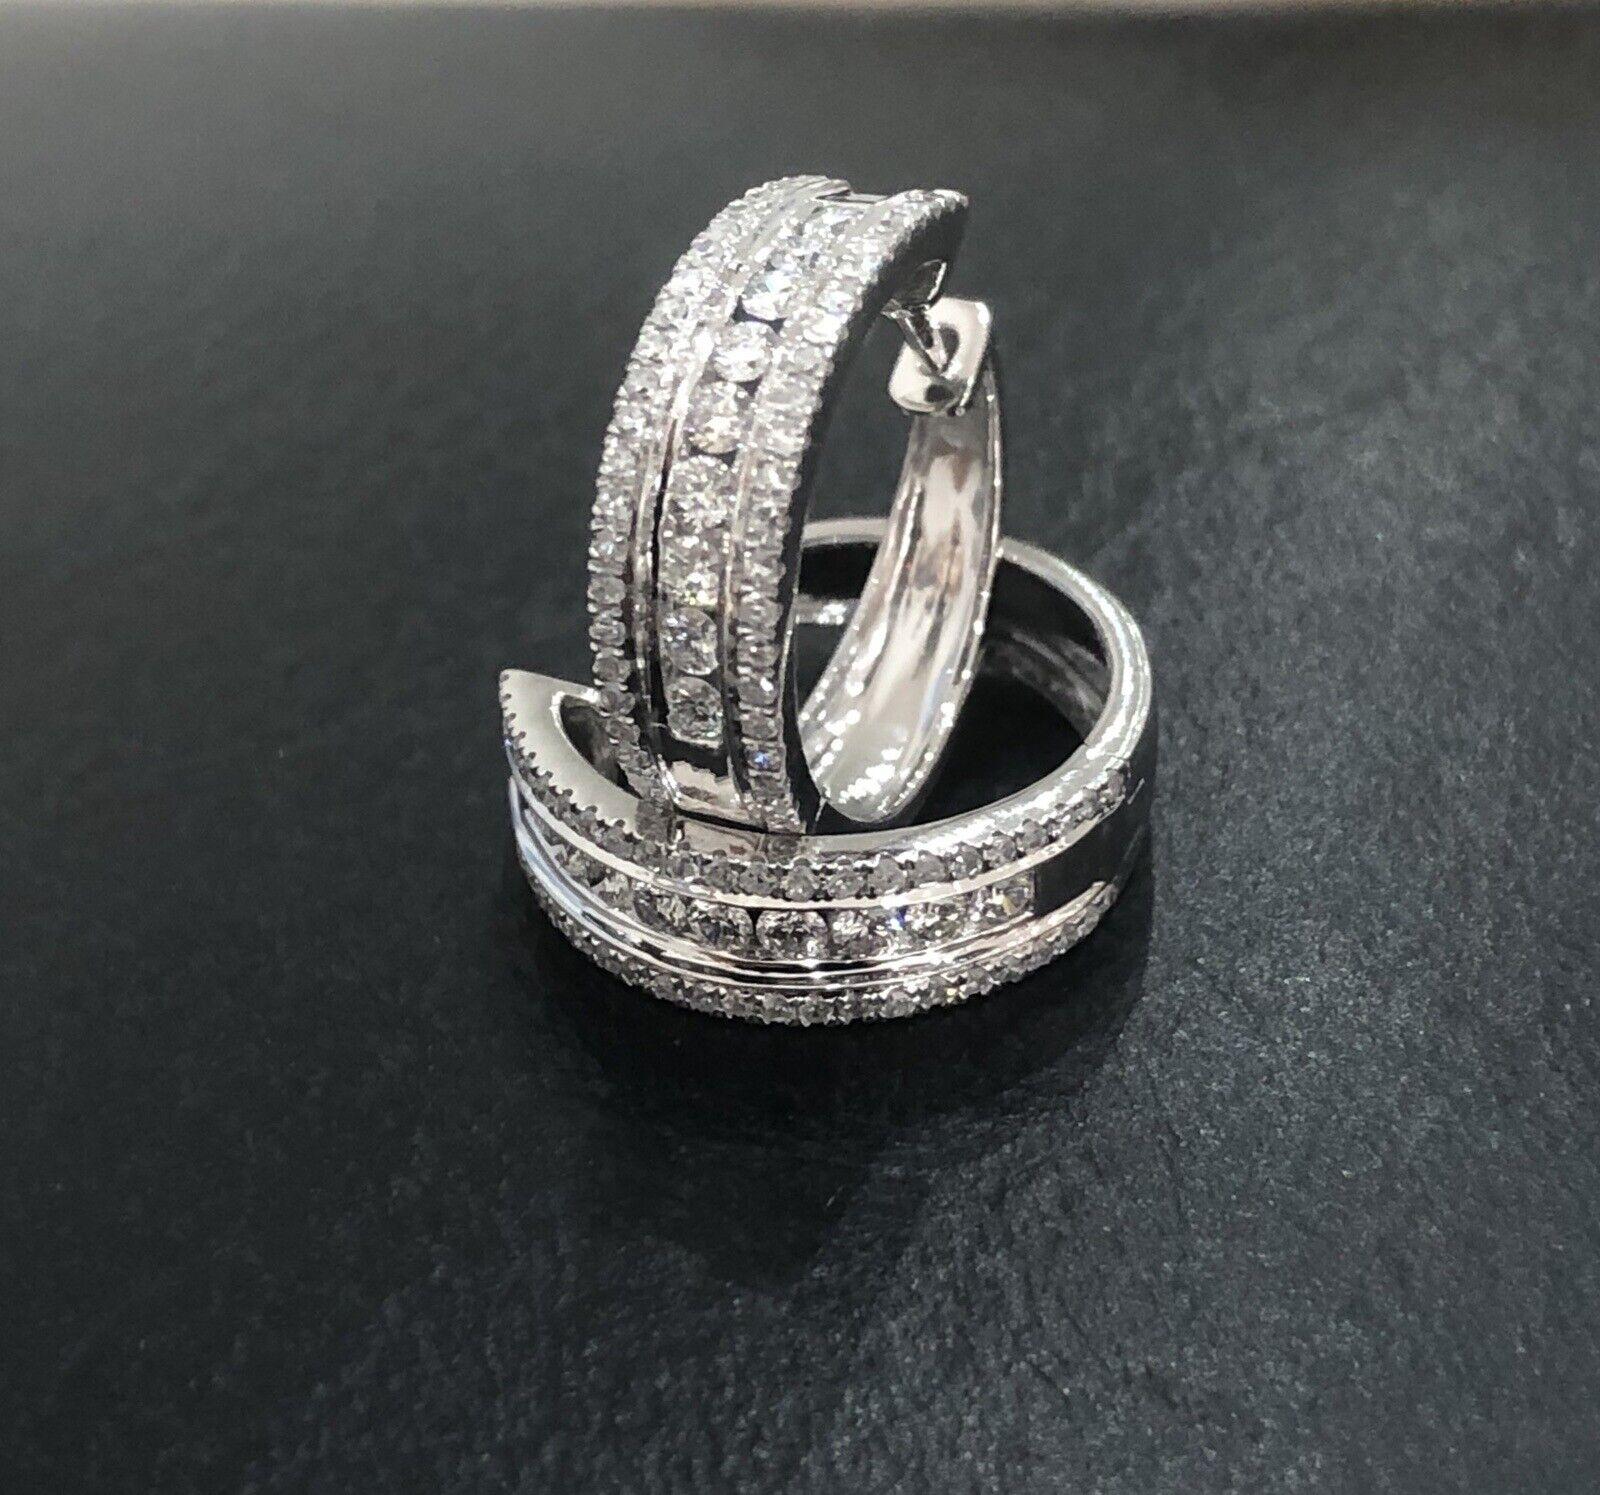 

Very elegant 18ct White gold diamond hoop Huggies earrings - hallmarked 750

0.65ct in full pair

VS & G/H - superior quality stones

Exceptionally clear diamonds and unmistakable sparkle

Over 5gram Very solid made

New with tags

Retail value